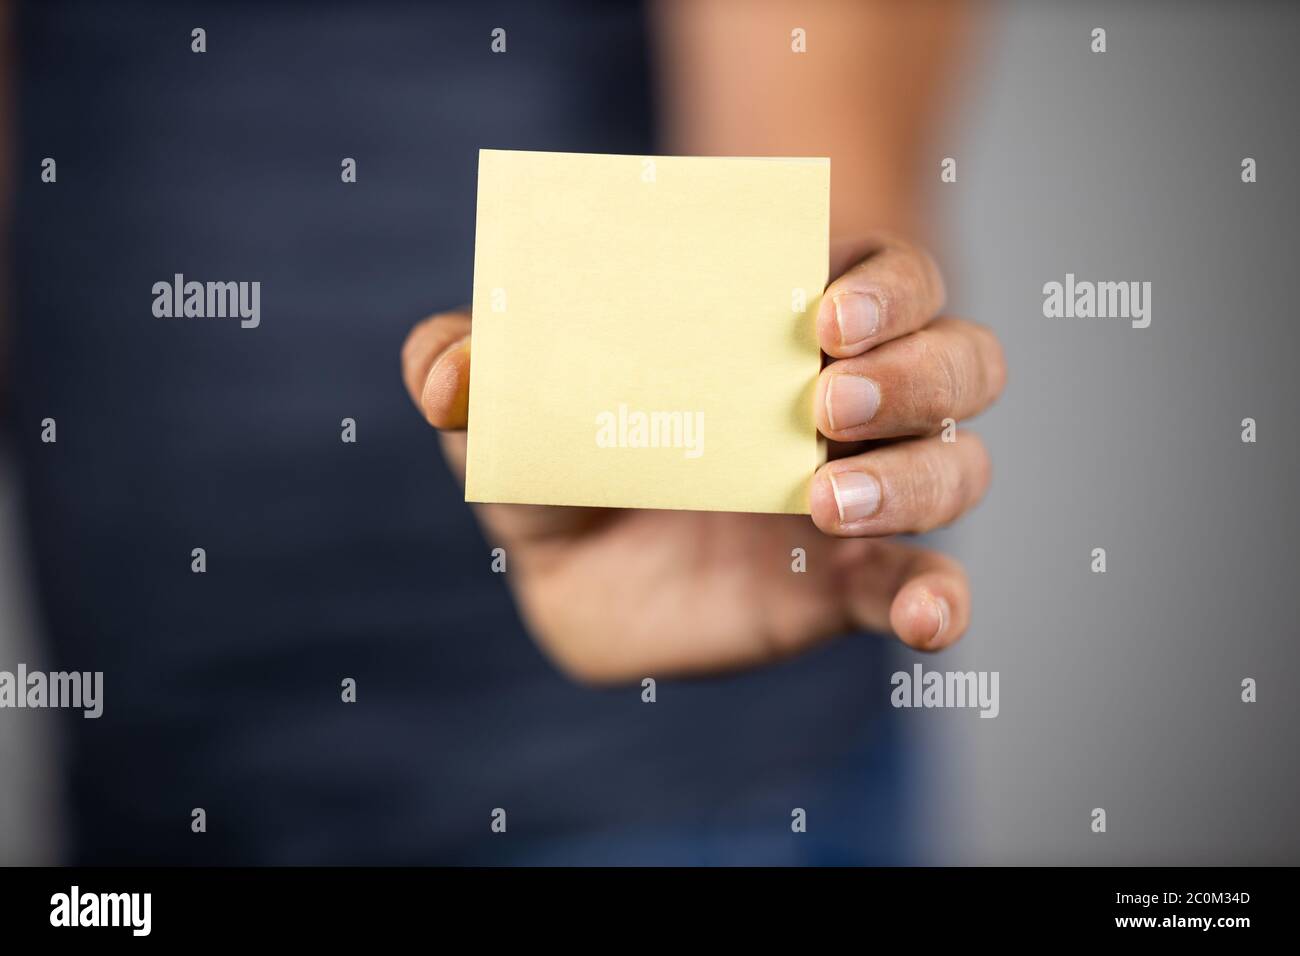 Man holding a yellow sticky note. Selective focus. Stock Photo